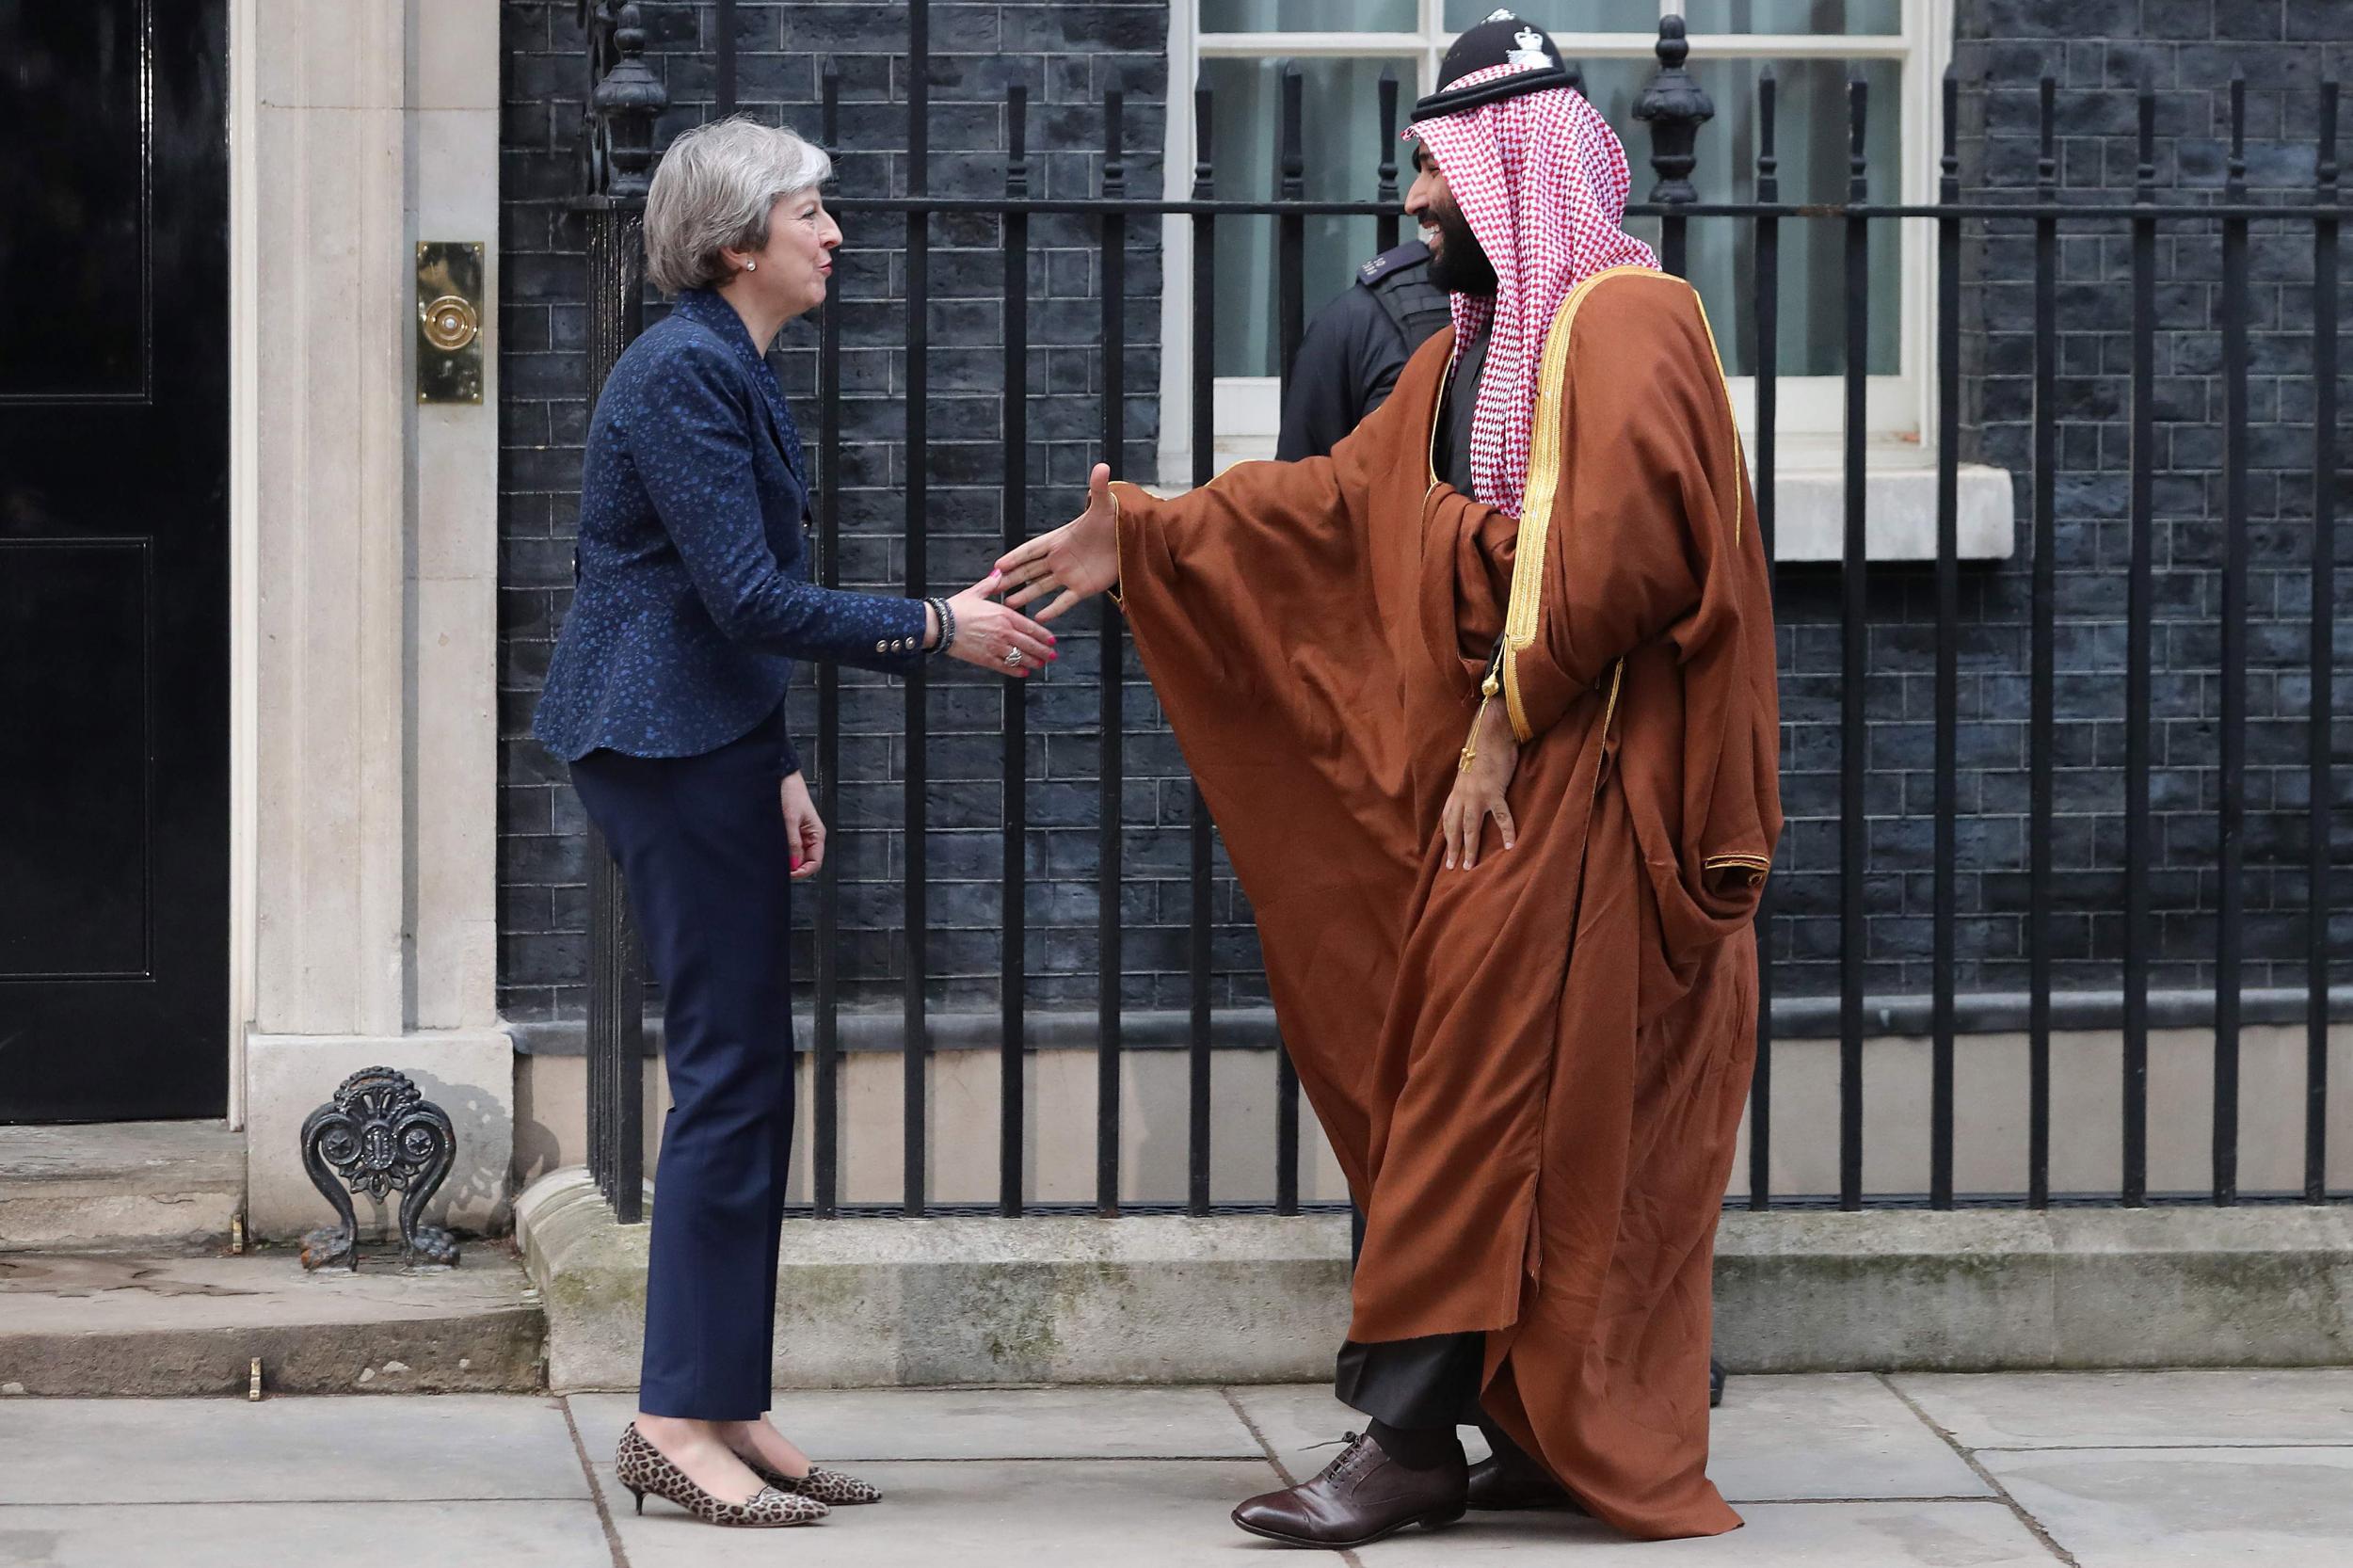 Saudi Arabia’s Crown Prince meets the Prime Minister in Downing Street